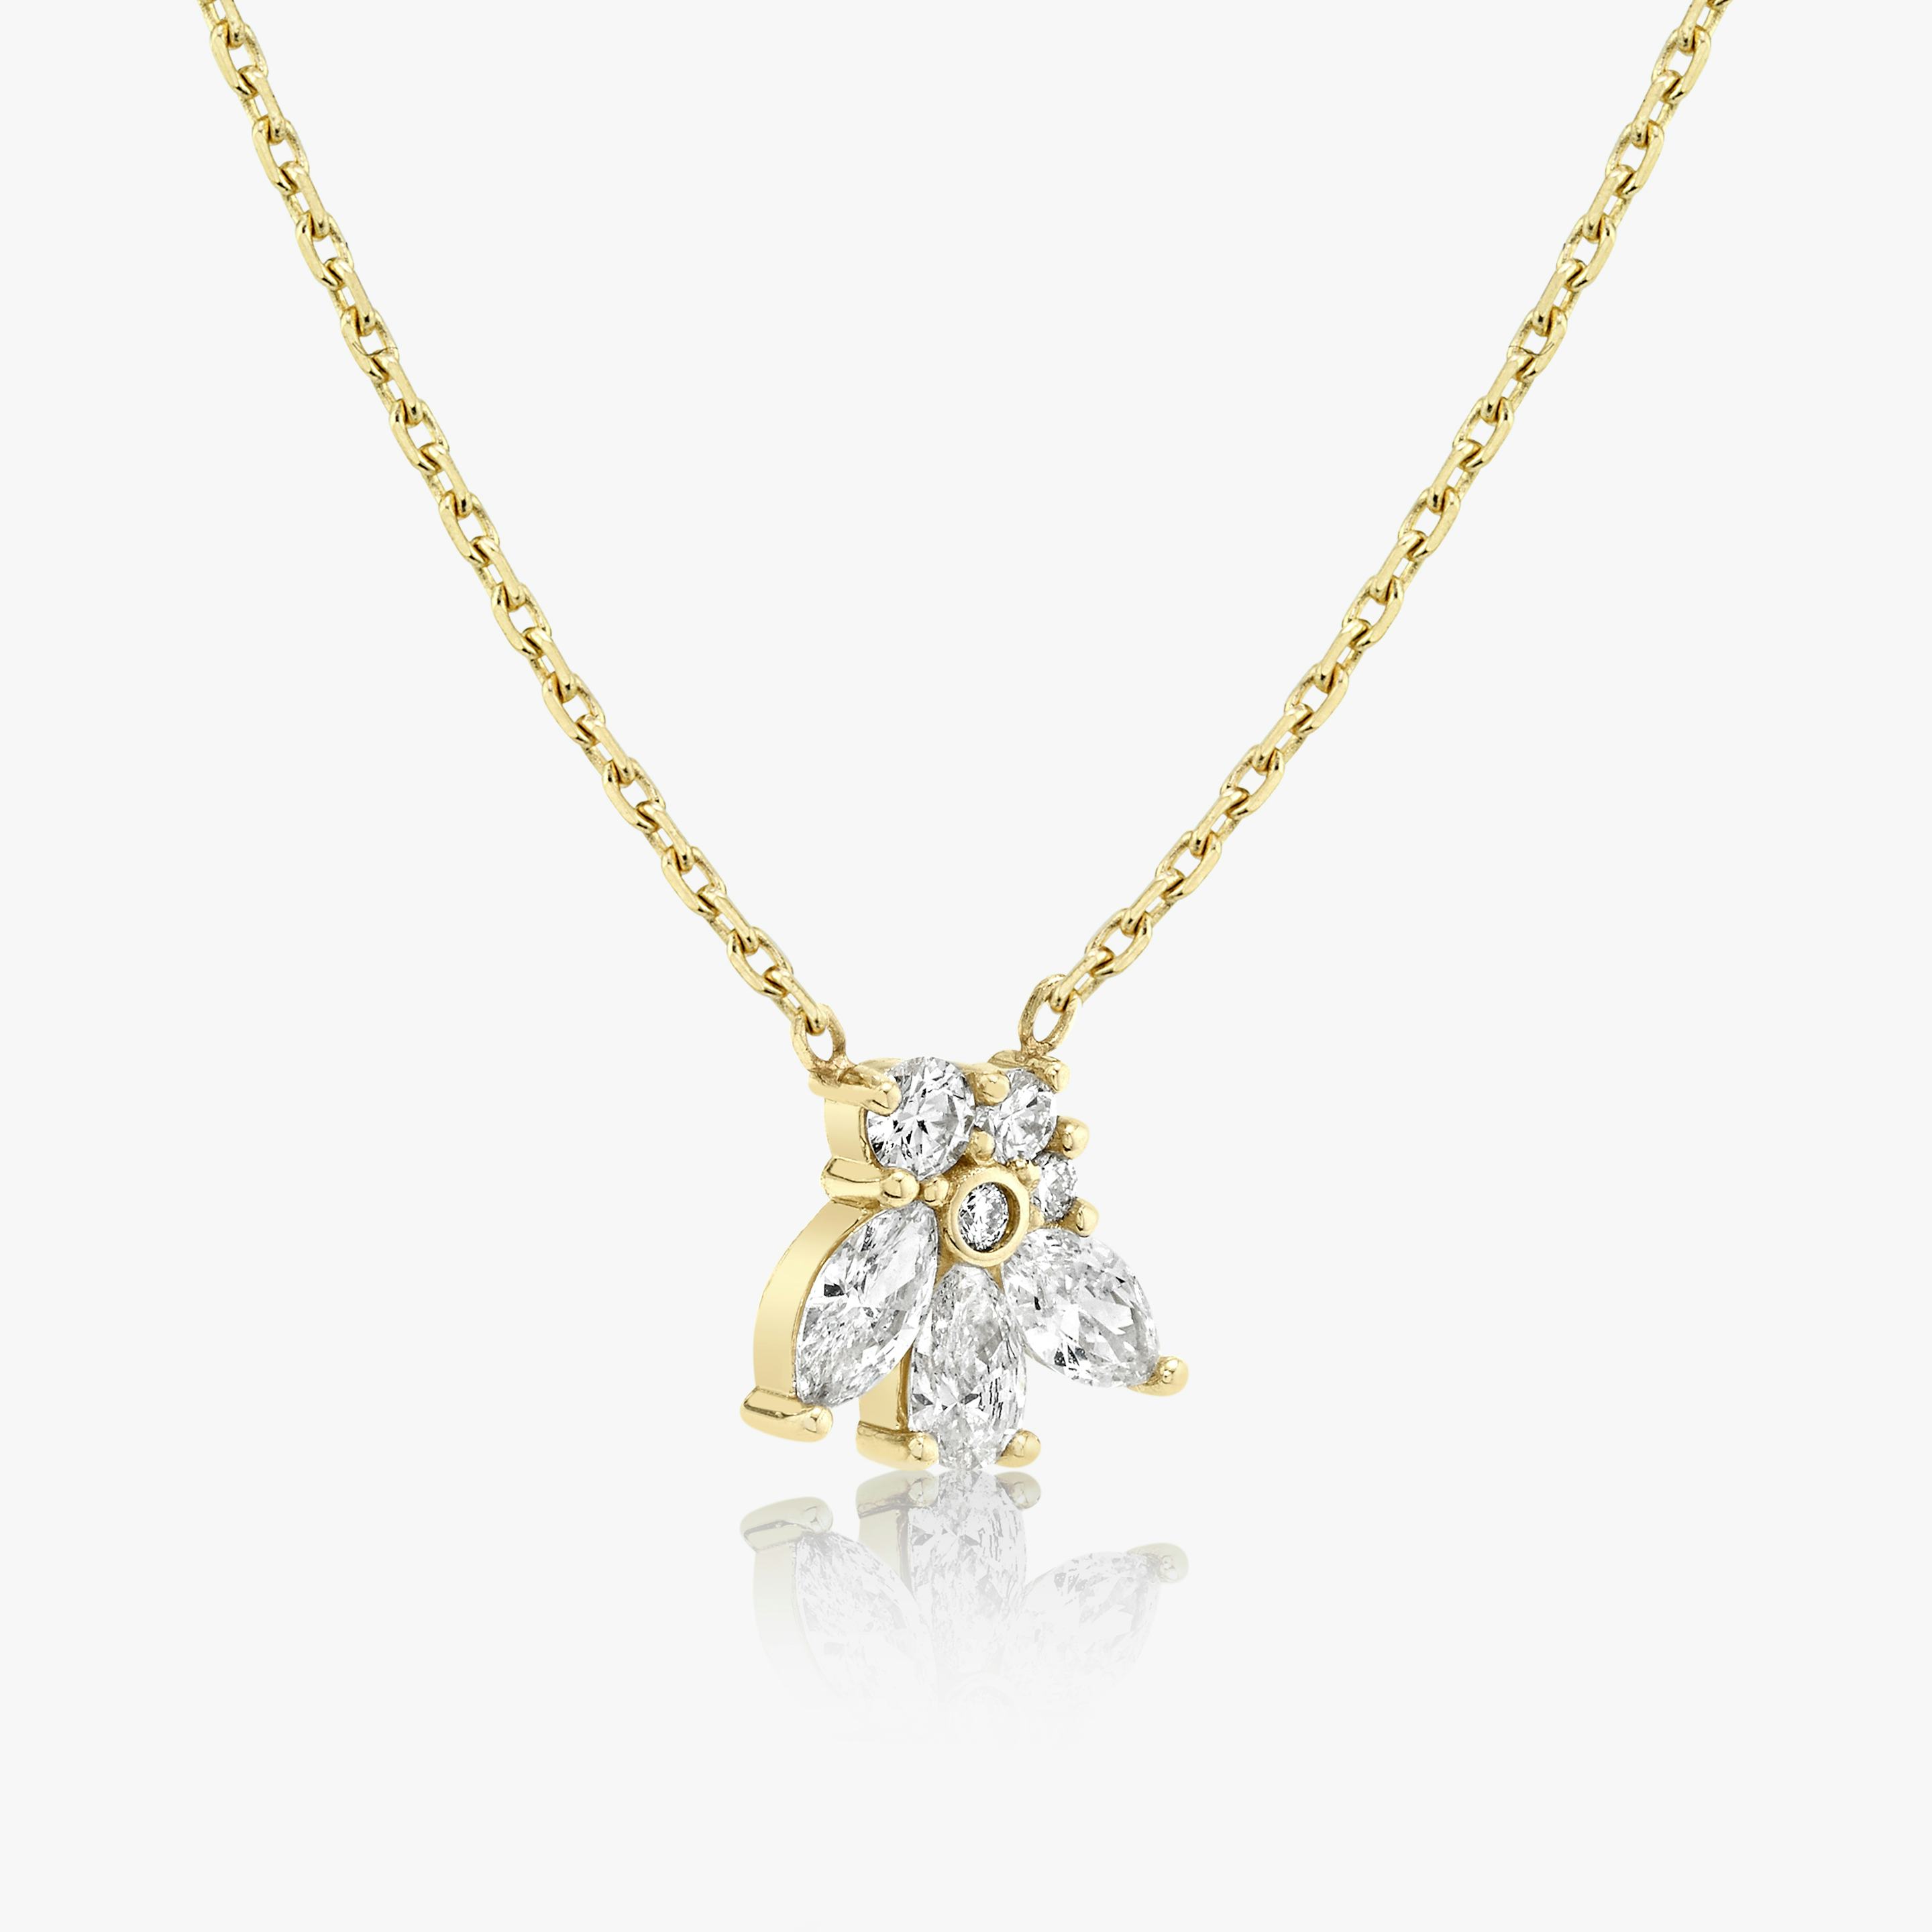 Perennial Necklace | round-brilliant+pear+marquise | 14k | 18k Yellow Gold | Chain length: 16-18